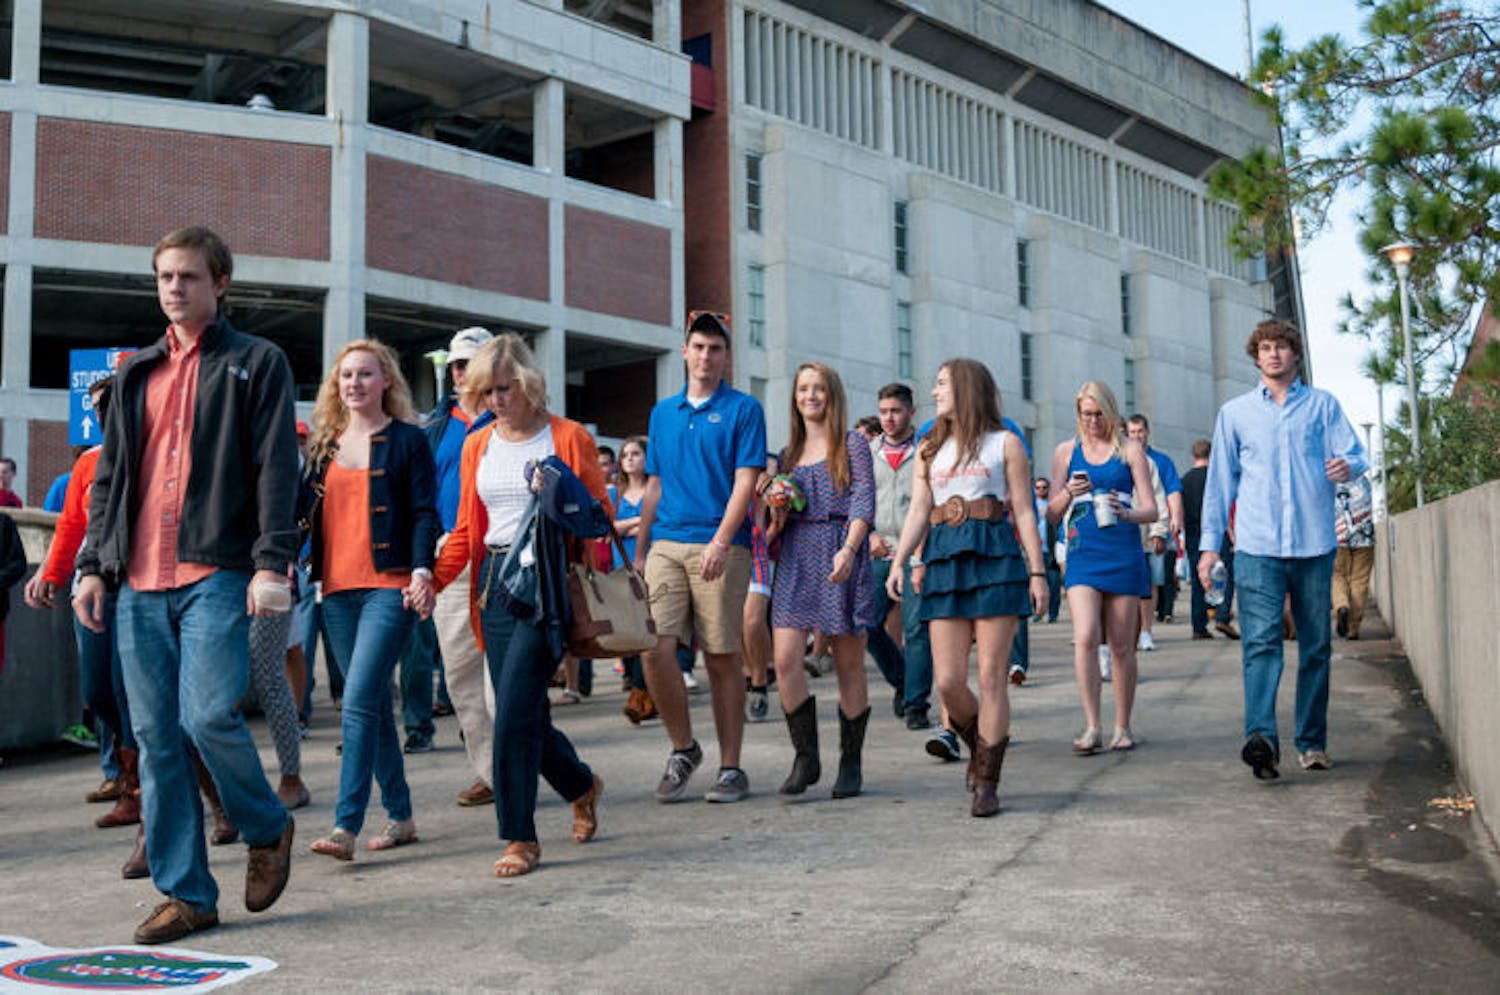 Game attendees exit the stadium during the third quarter of Florida’s 37-7 loss to Florida State on Saturday. This is UF’s first losing season since 1979.